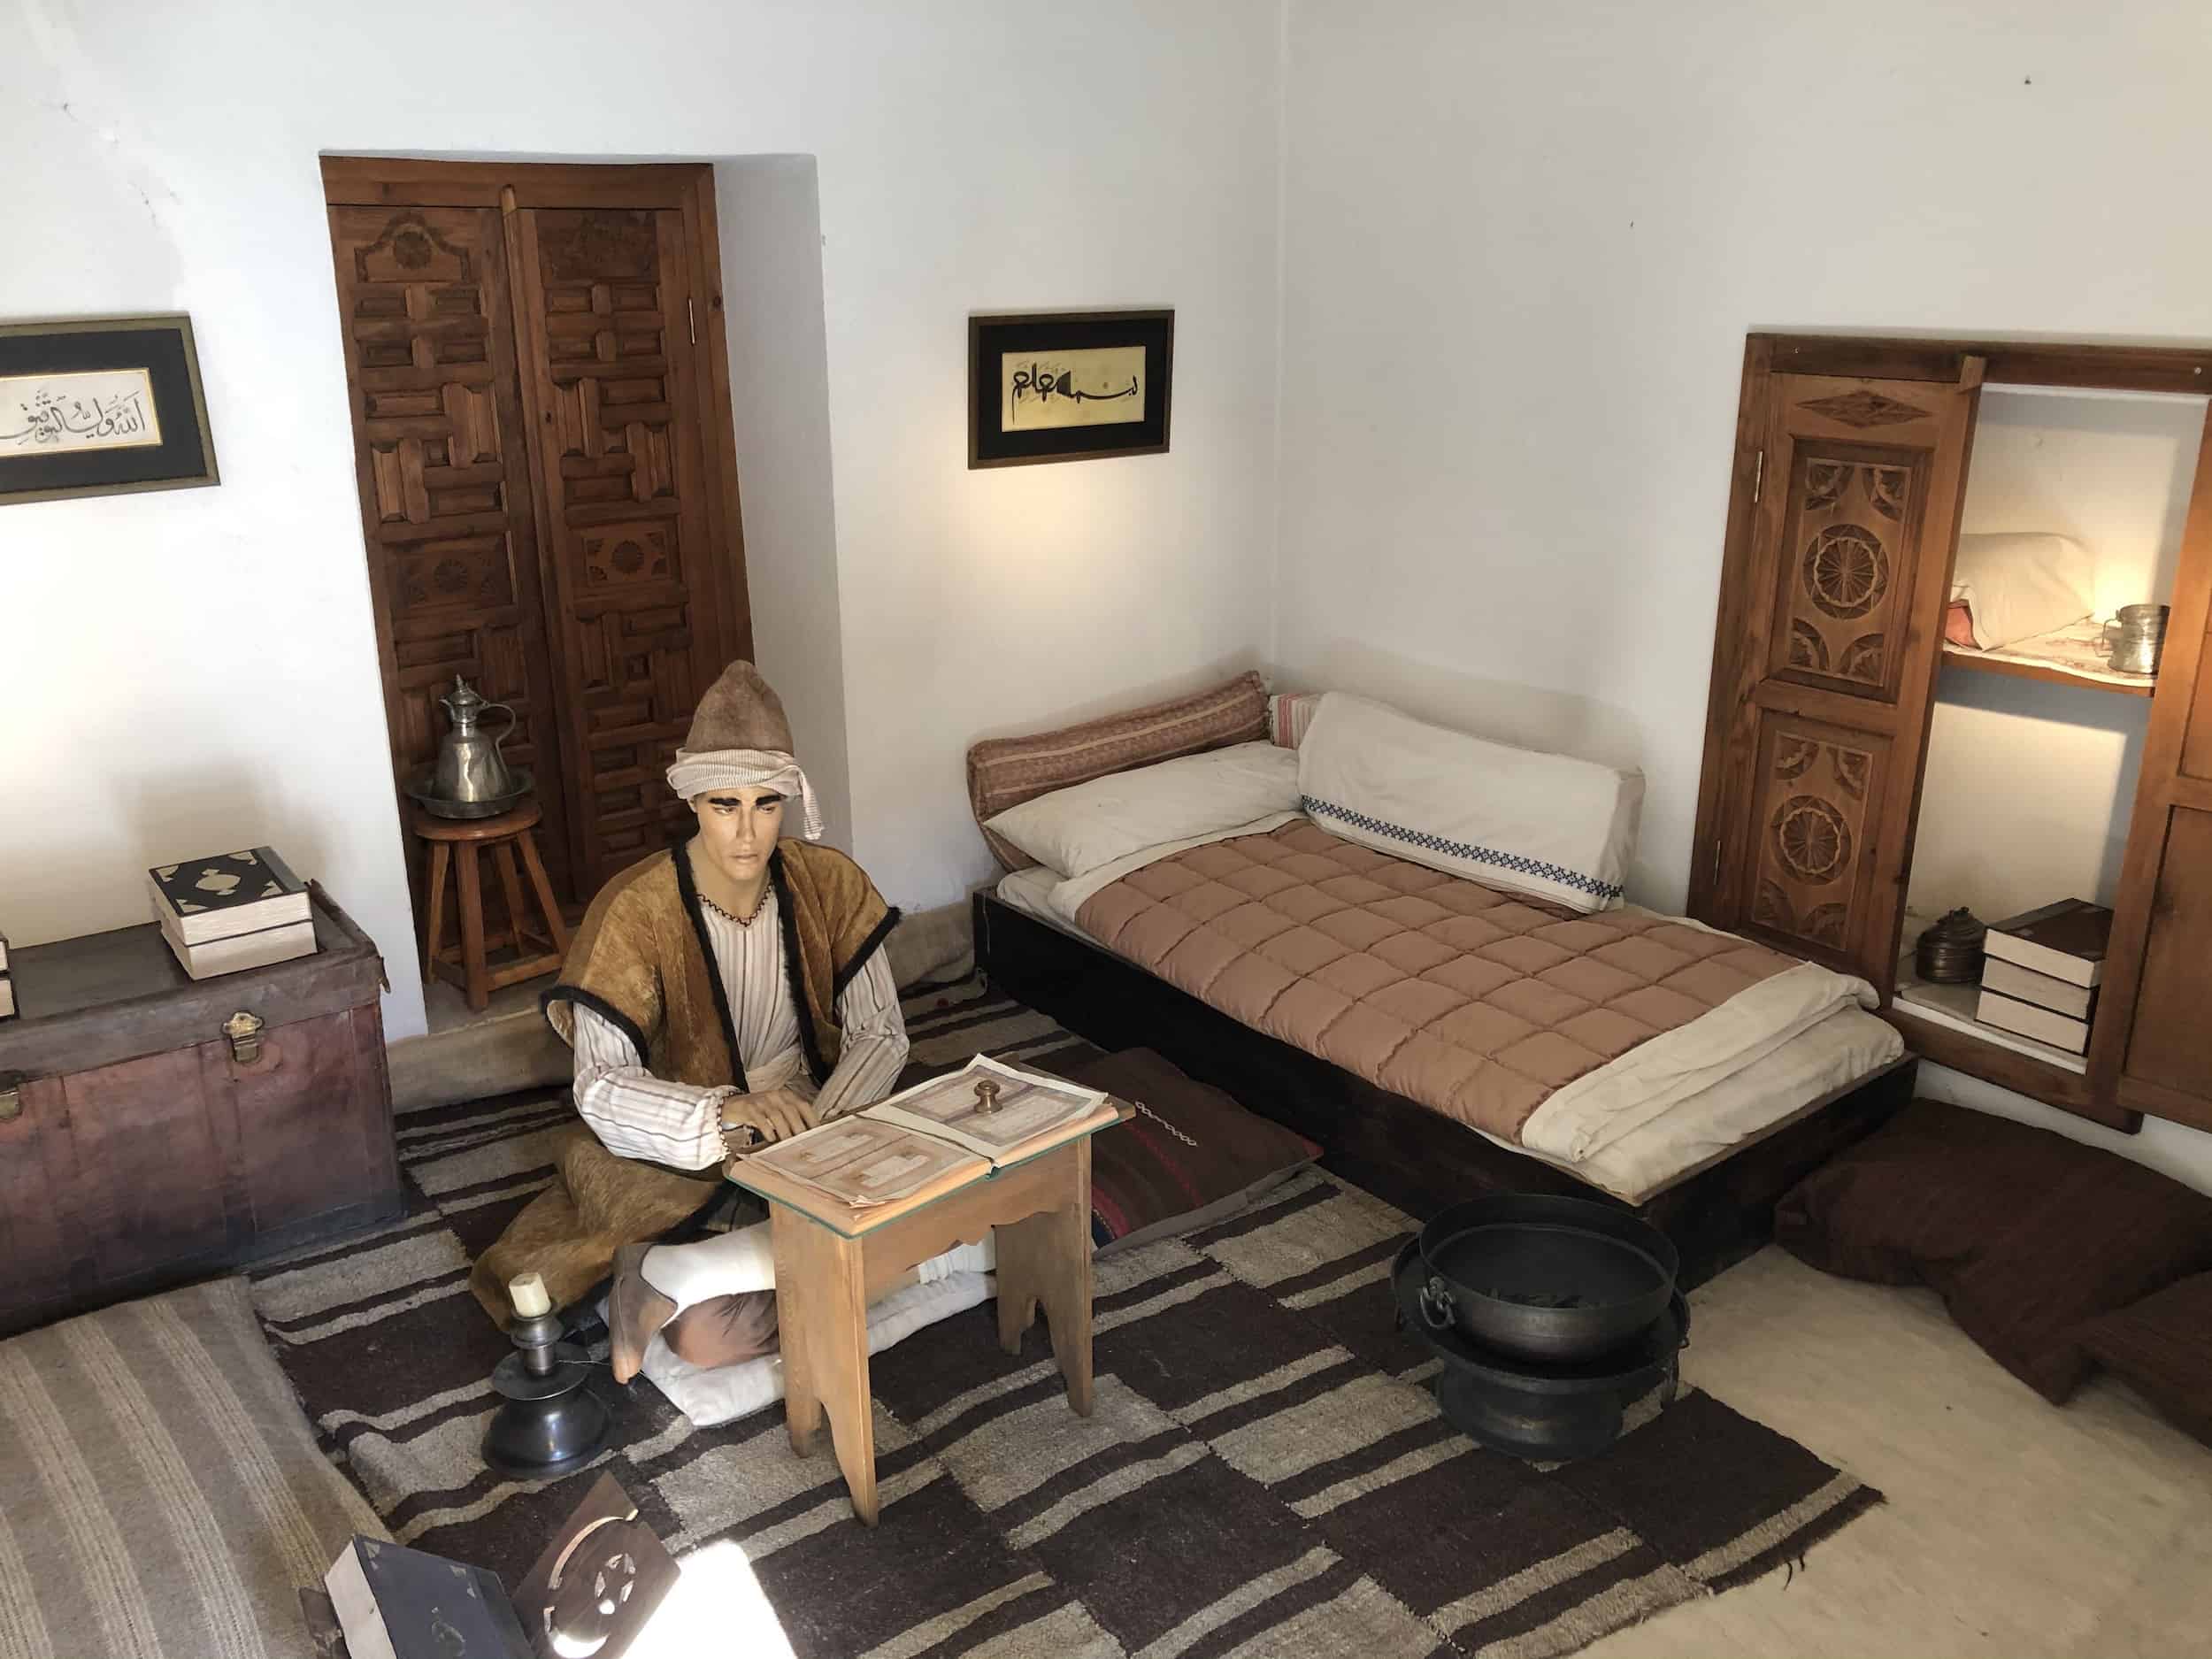 Student room at the Medical School at the Complex of Bayezid II Health Museum in Edirne, Turkey